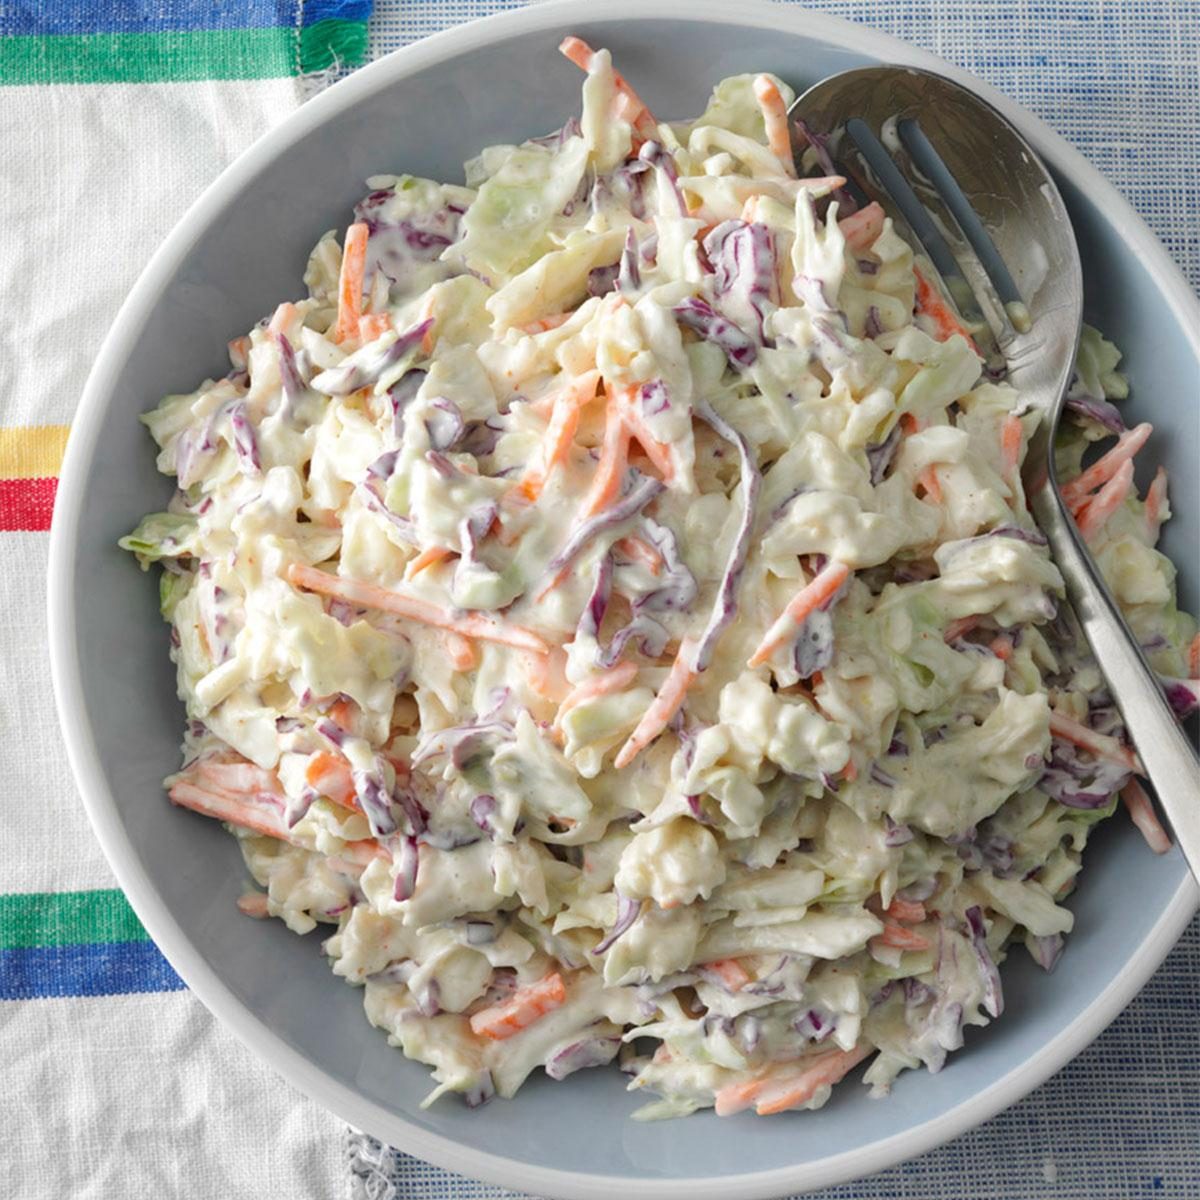 Creamy Coleslaw Recipe: How to Make It | Taste of Home